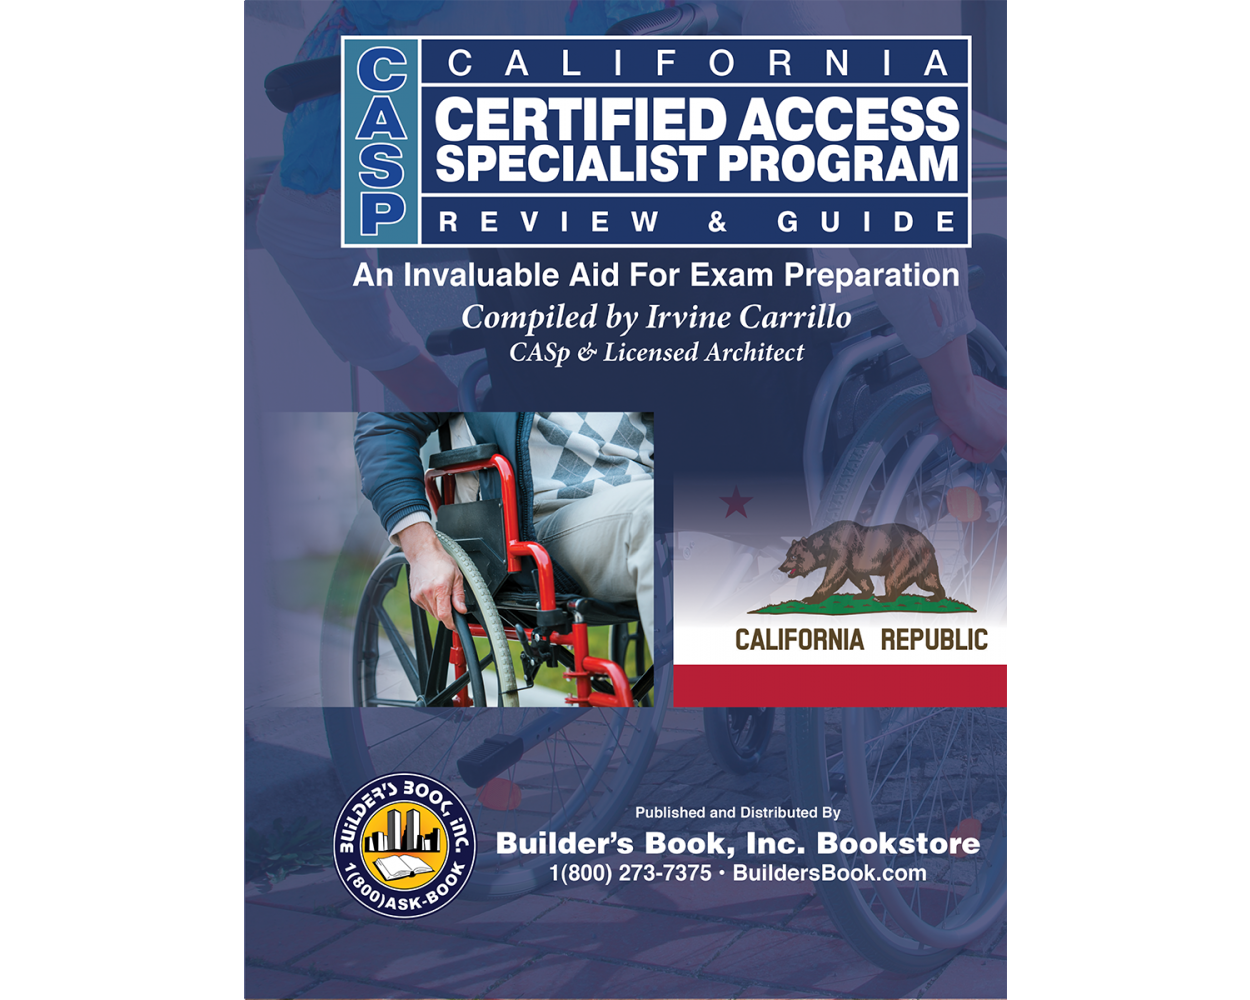 California Certified Access Specialist Program (CASp) Review and Guide